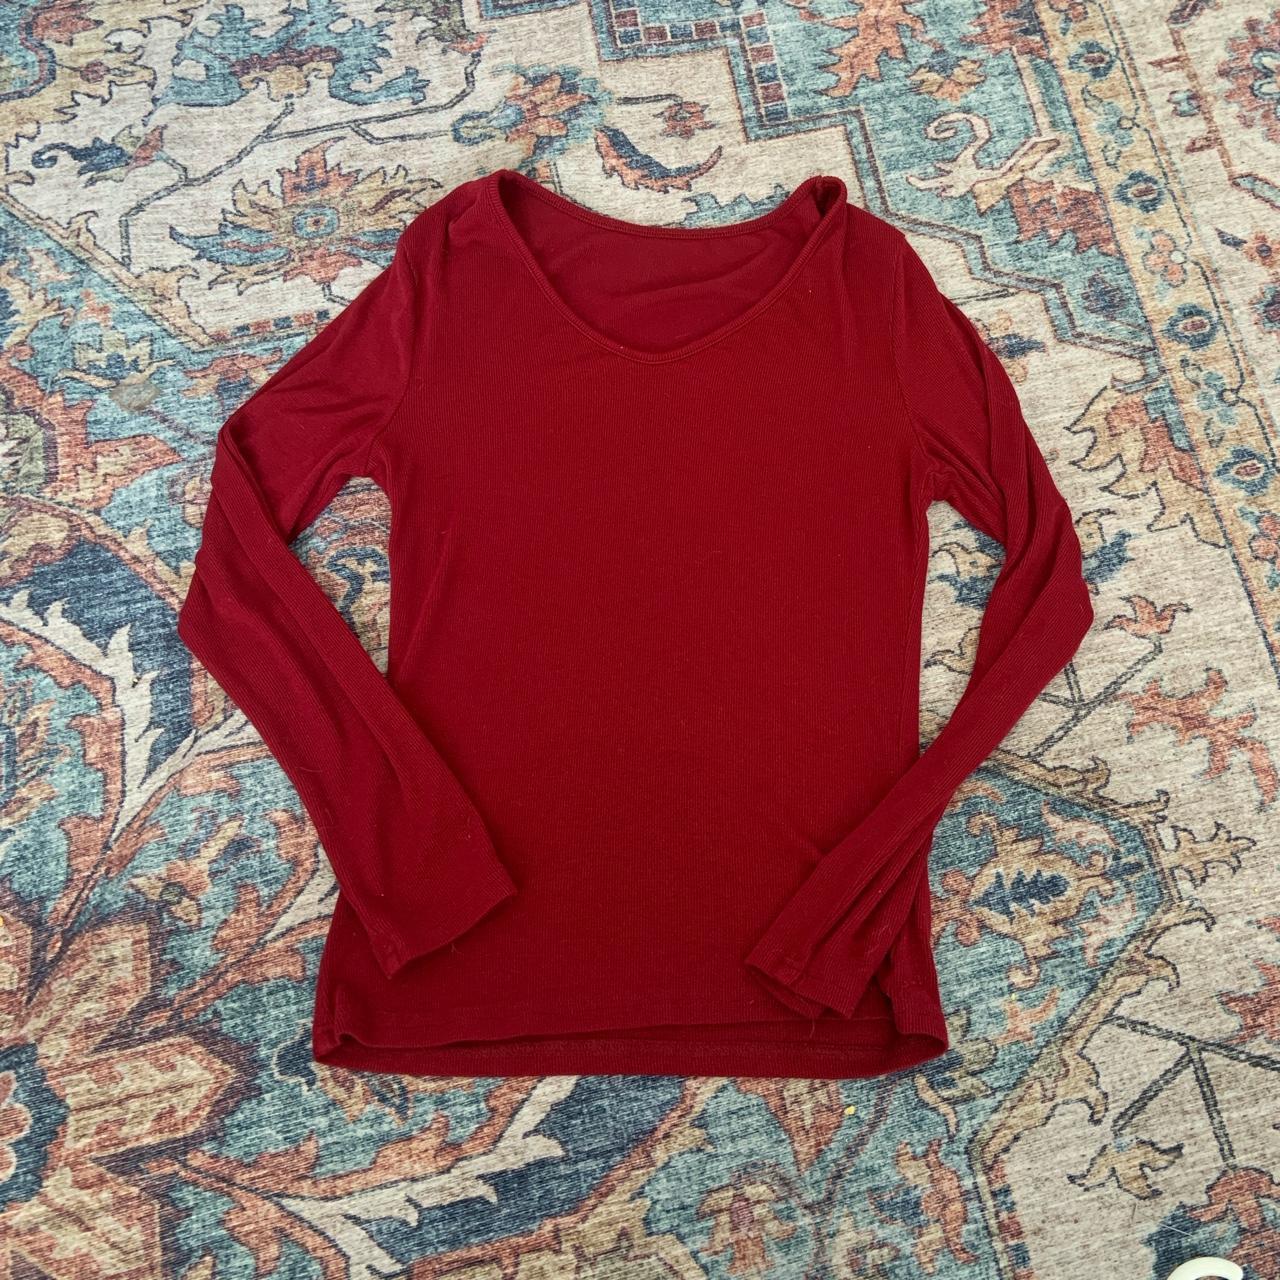 Plain red form fit long sleeve Ribbed No tag - Depop